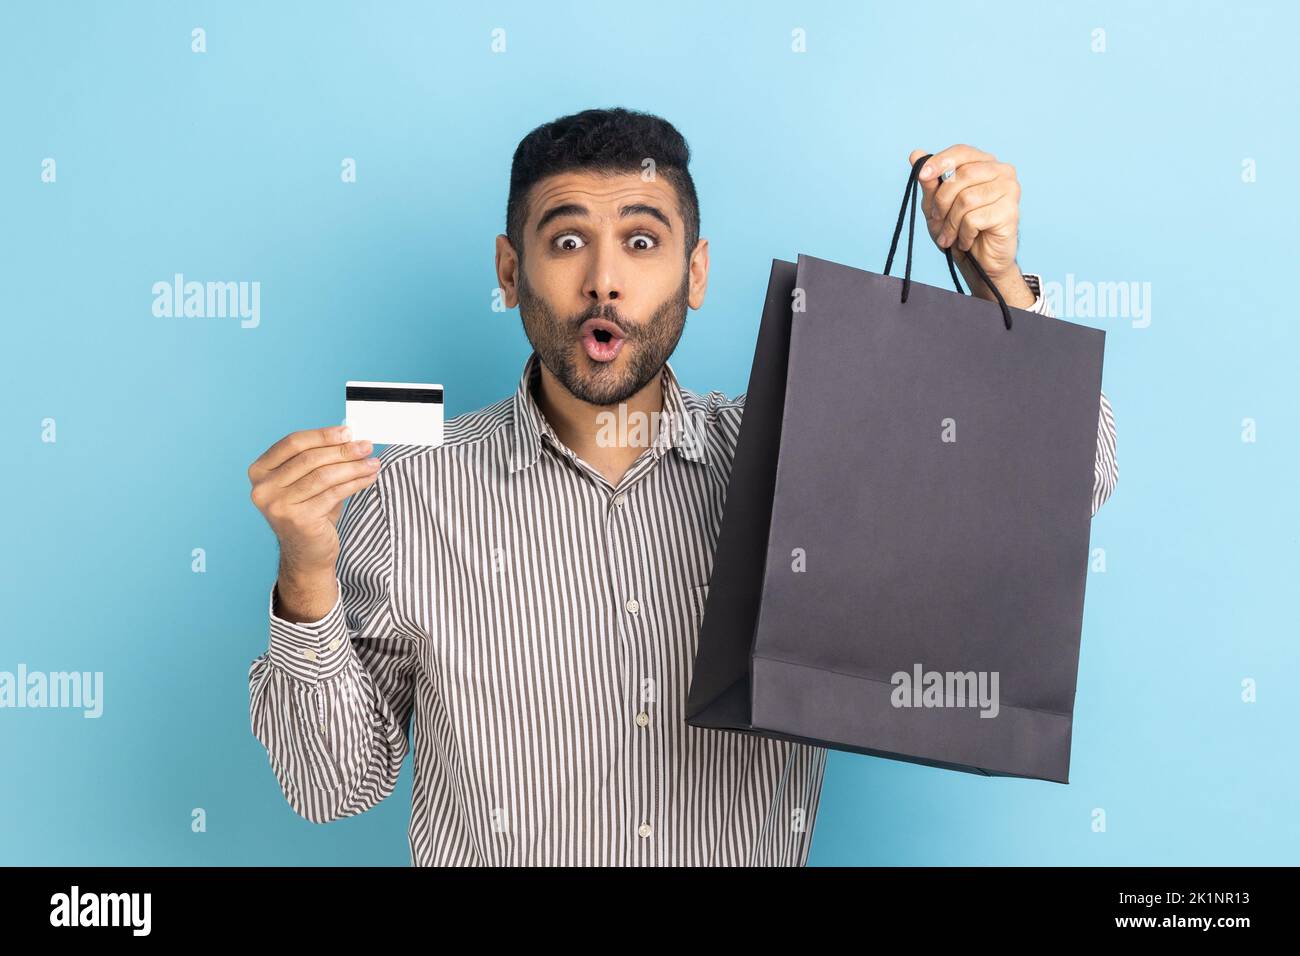 Astonished businessman holding and showing limitless credit card and shopping bags, surprised with great shopping, wearing striped shirt. Indoor studio shot isolated on blue background. Stock Photo